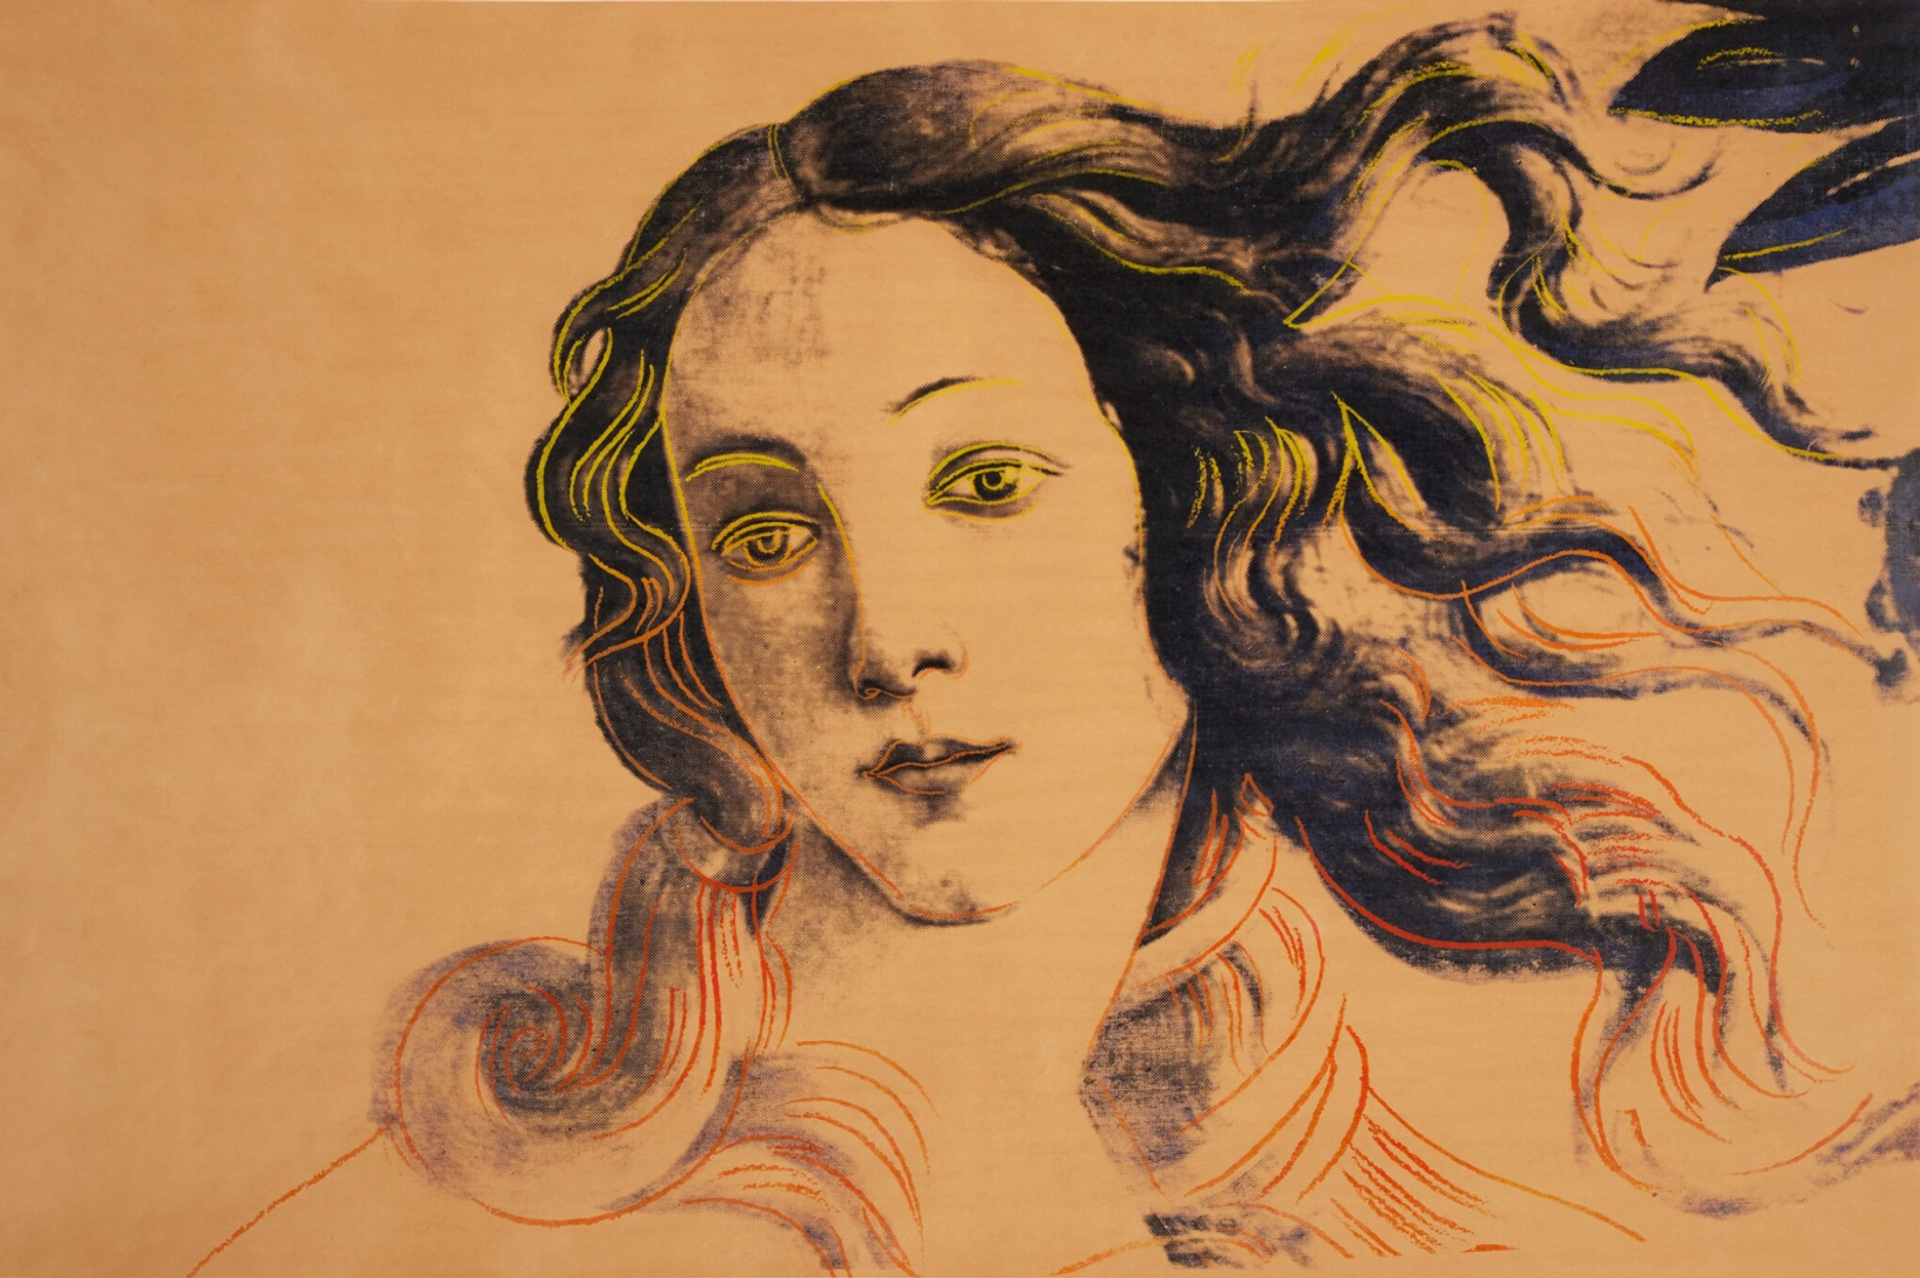 Andy Warhol's silkscreen ink on paper appropriation of Sandro Botticelli's ‘Birth of Venus’. Botticelli's original composition is cropped, focusing on Venus' portrait. The portrait is executed in black ink on beige paper, with graphic lines delineated in yellow and orange in Venus' hair and eyes.